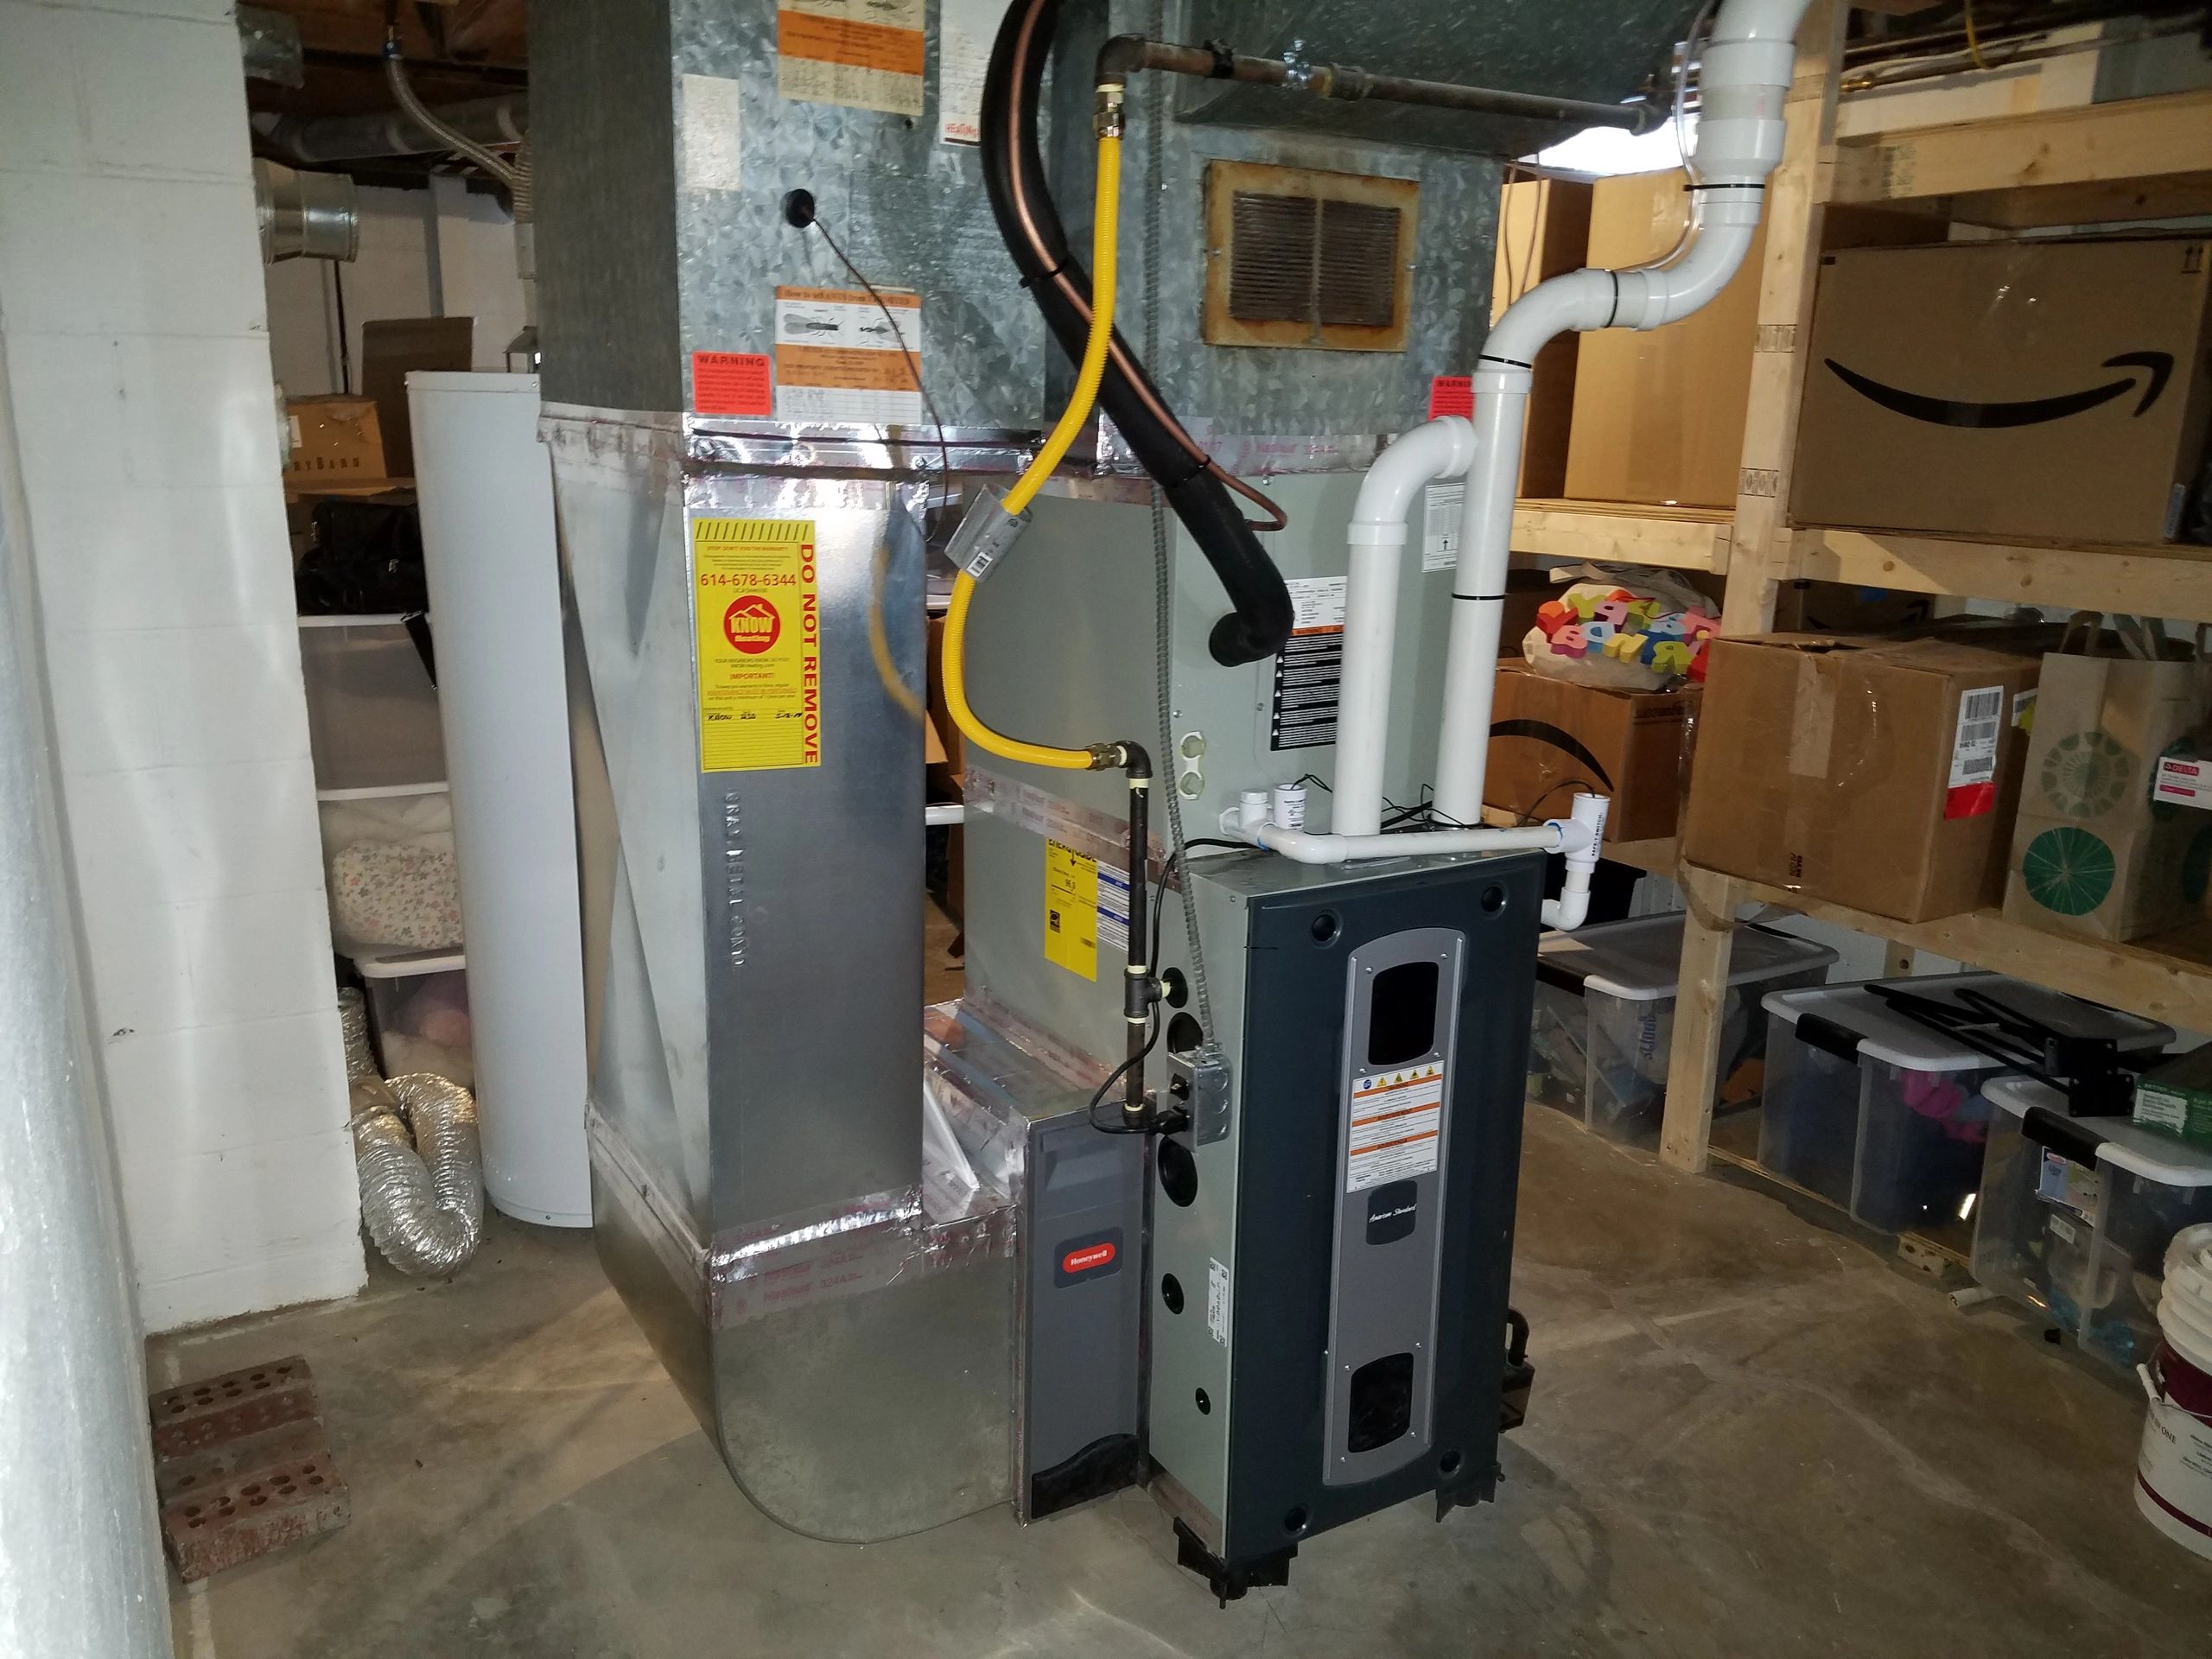 Furnace and coil installation in the basement